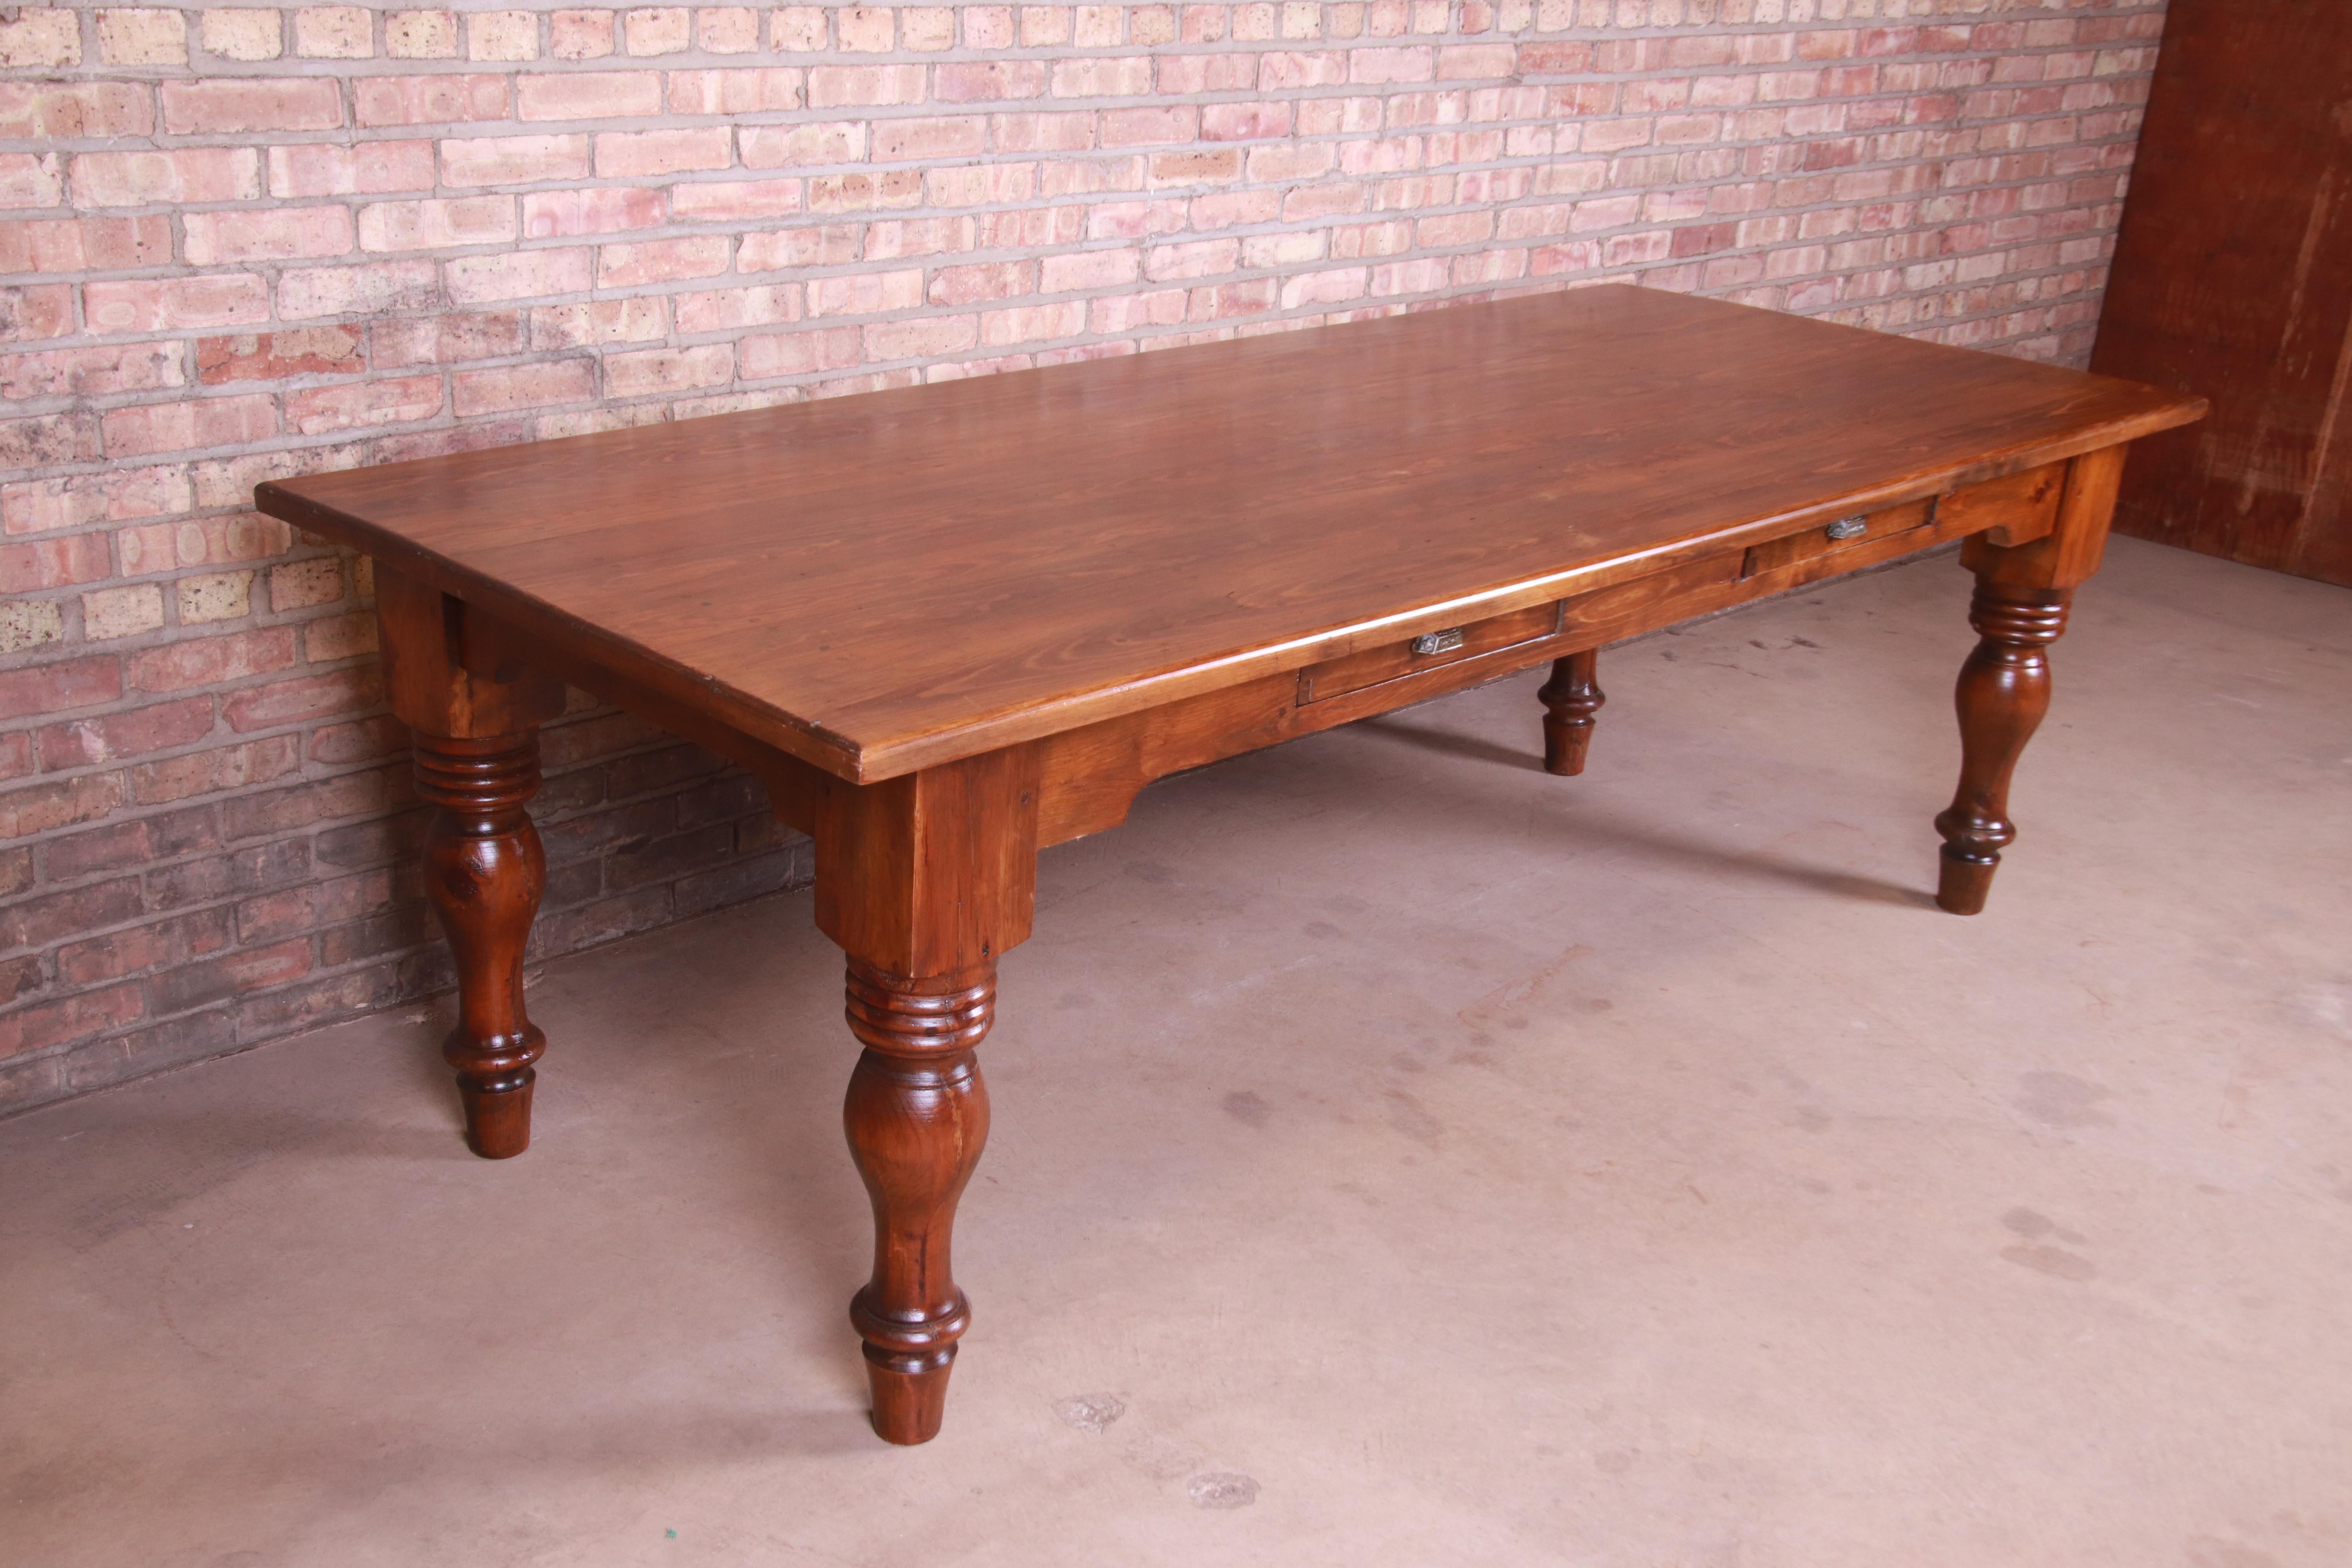 19th Century Rustic Pine American Harvest Farm Table with Drawers 1